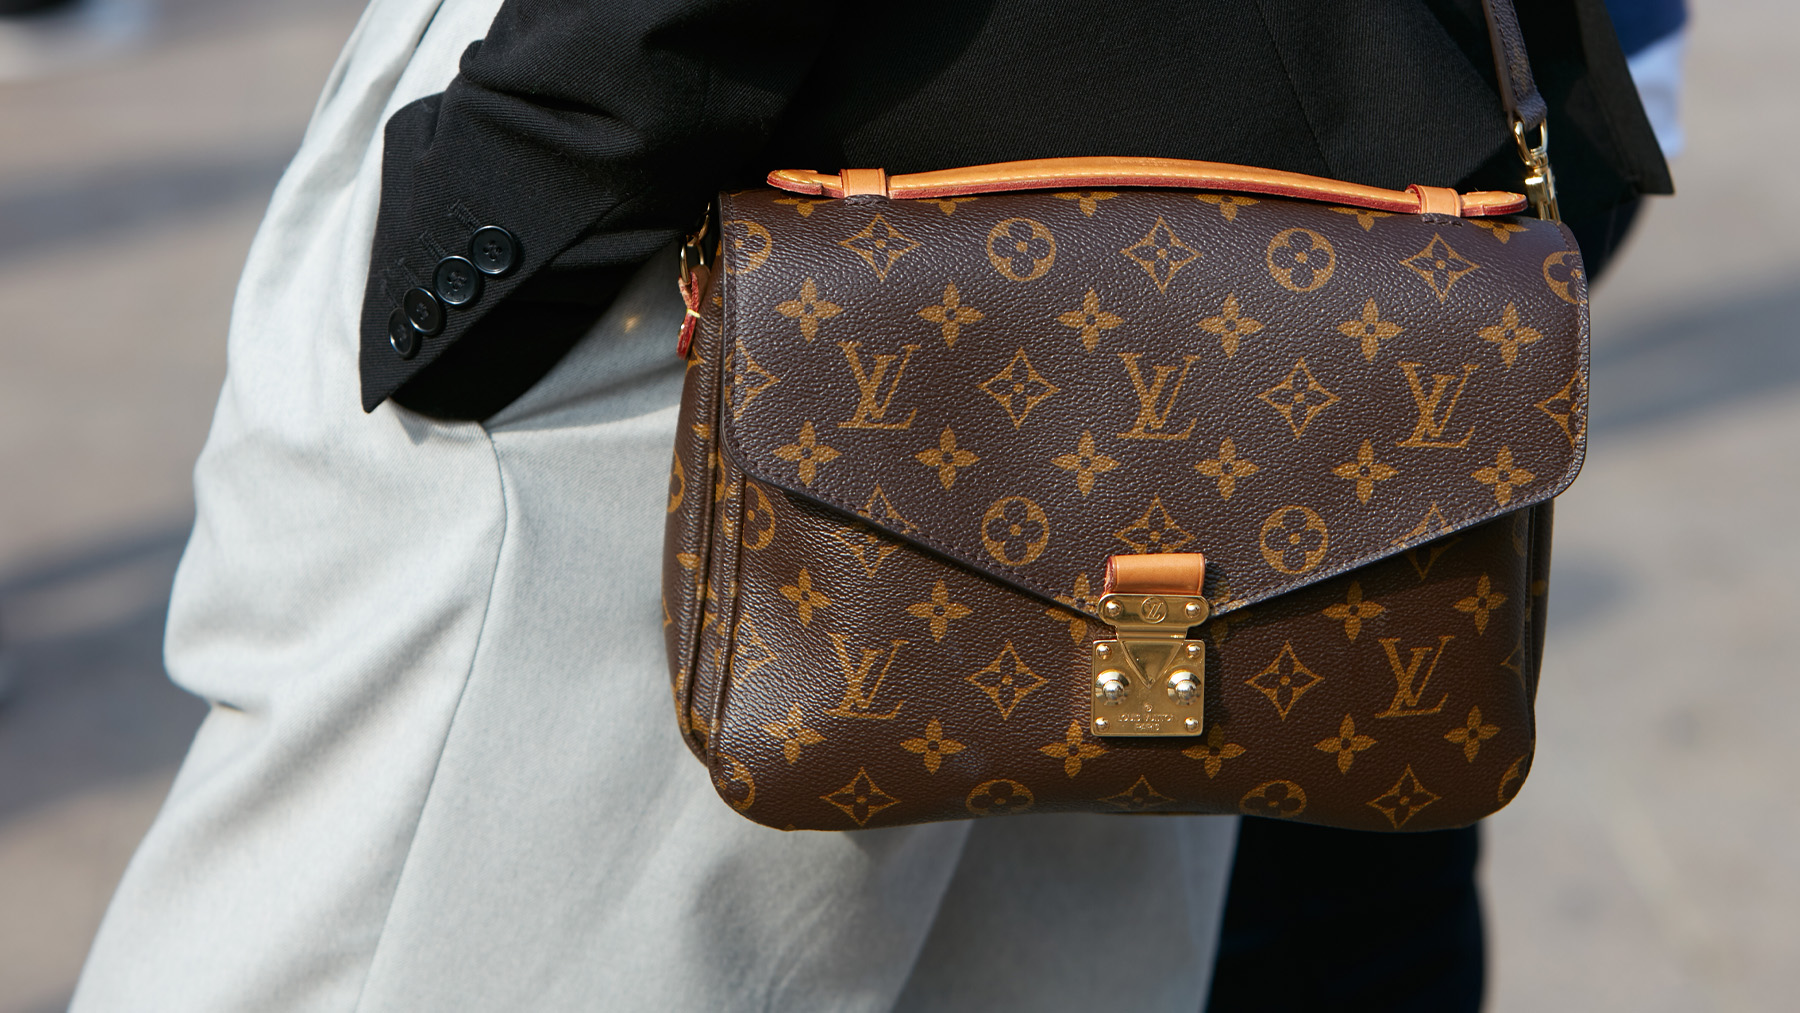 Louis Vuitton factory workers in France stage walkout demanding higher pay,  protesting against changes in working hours — TFR